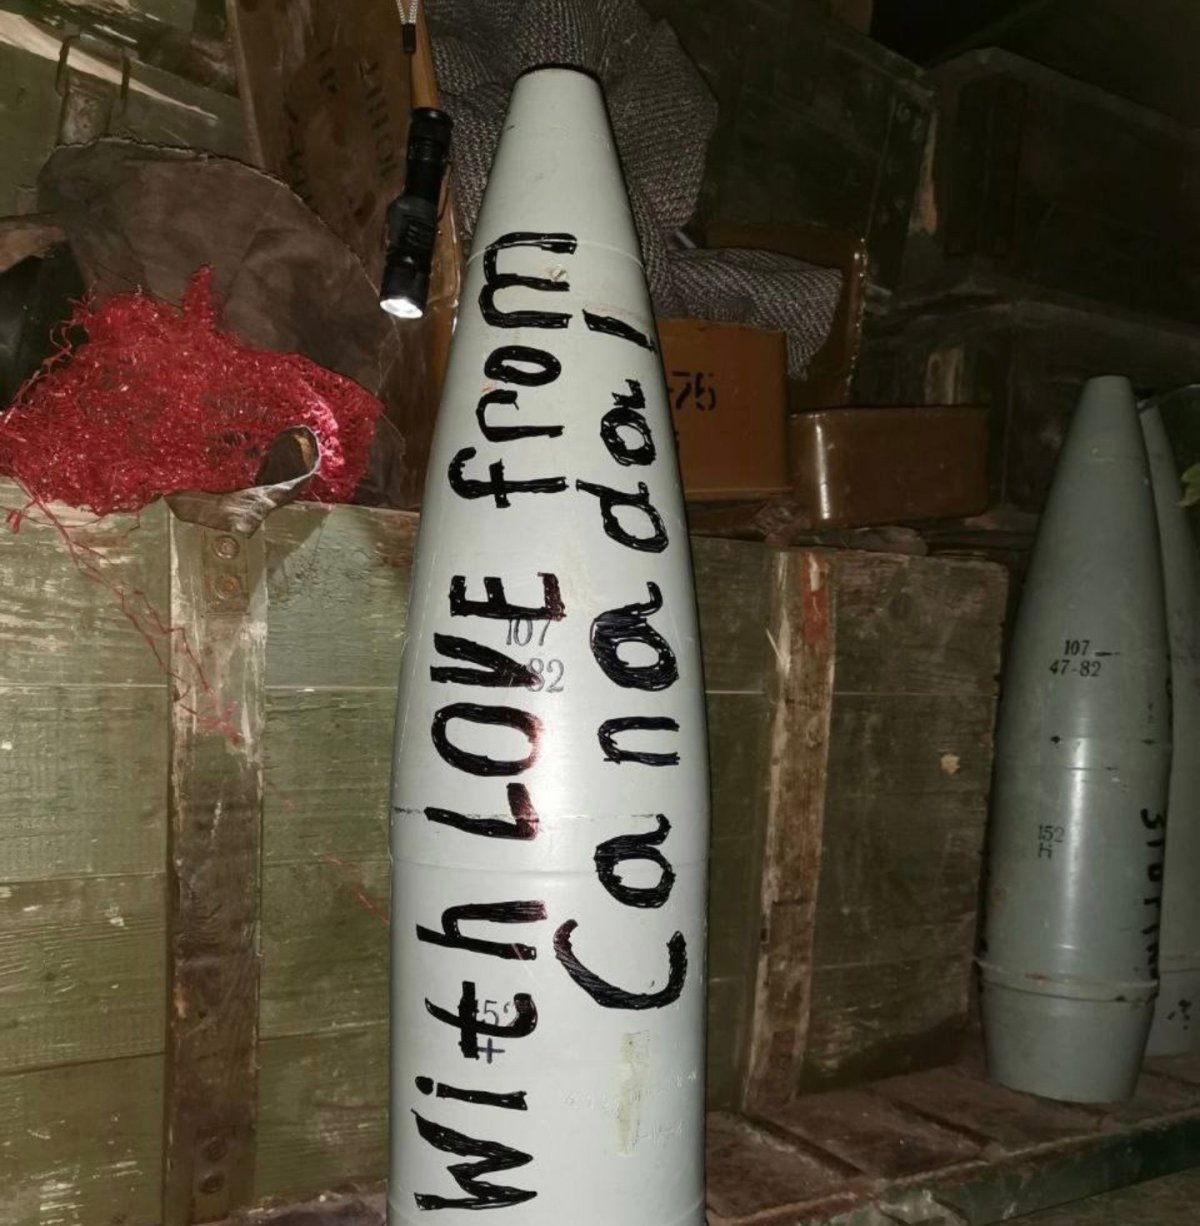 Ukrainian rocket with a message paid for by a Canadian donor.